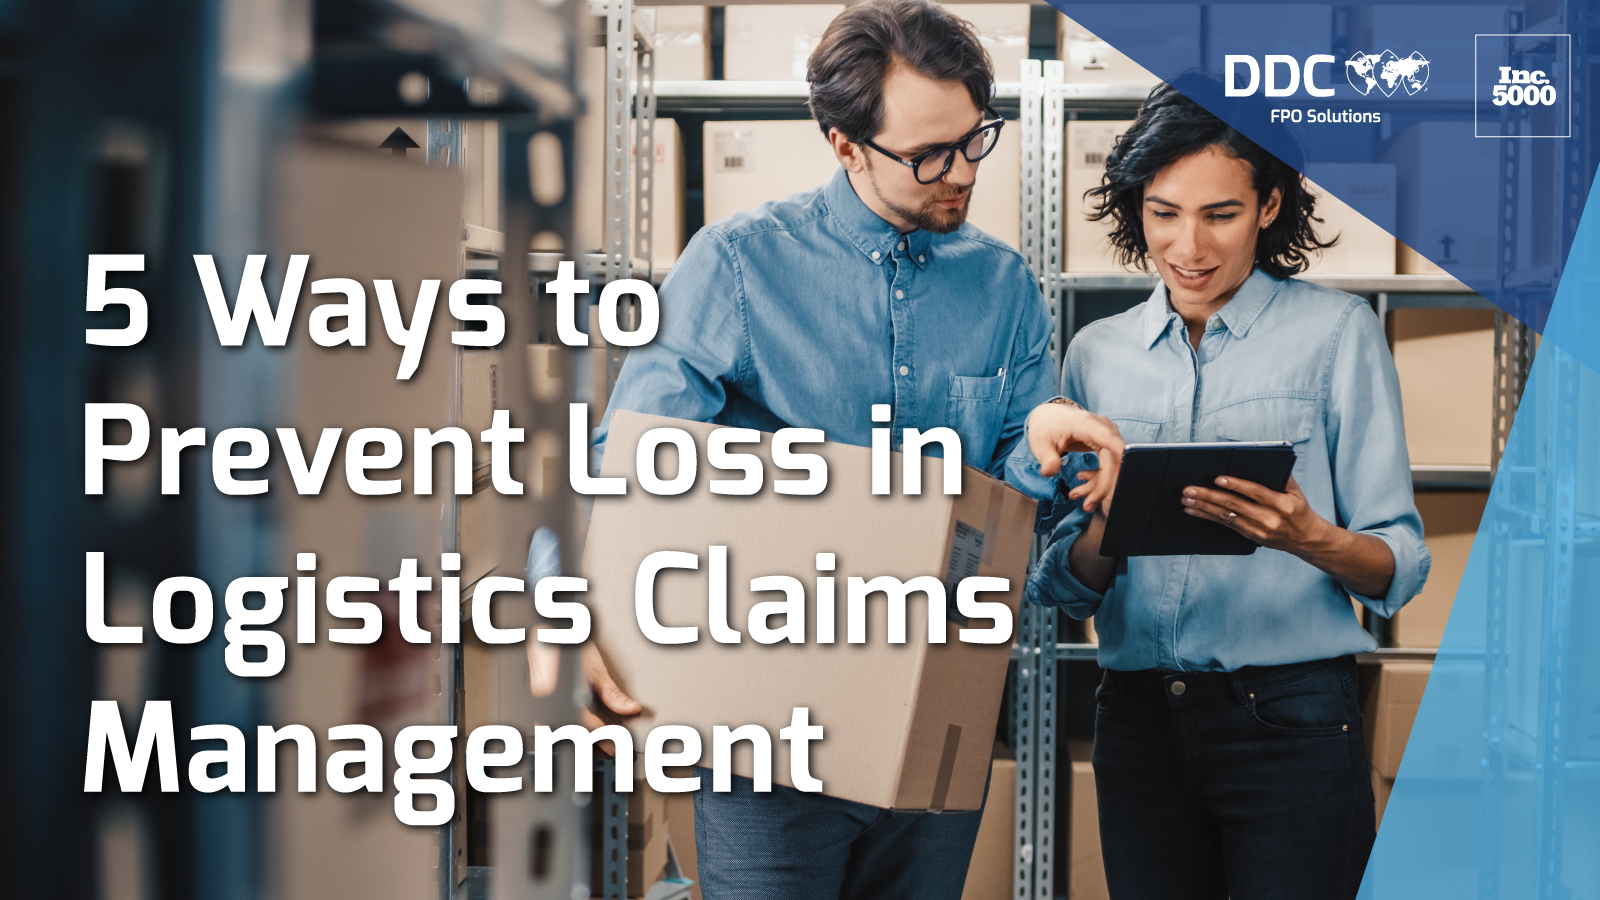 5 Ways to Prevent Loss in Logistics Claims Management